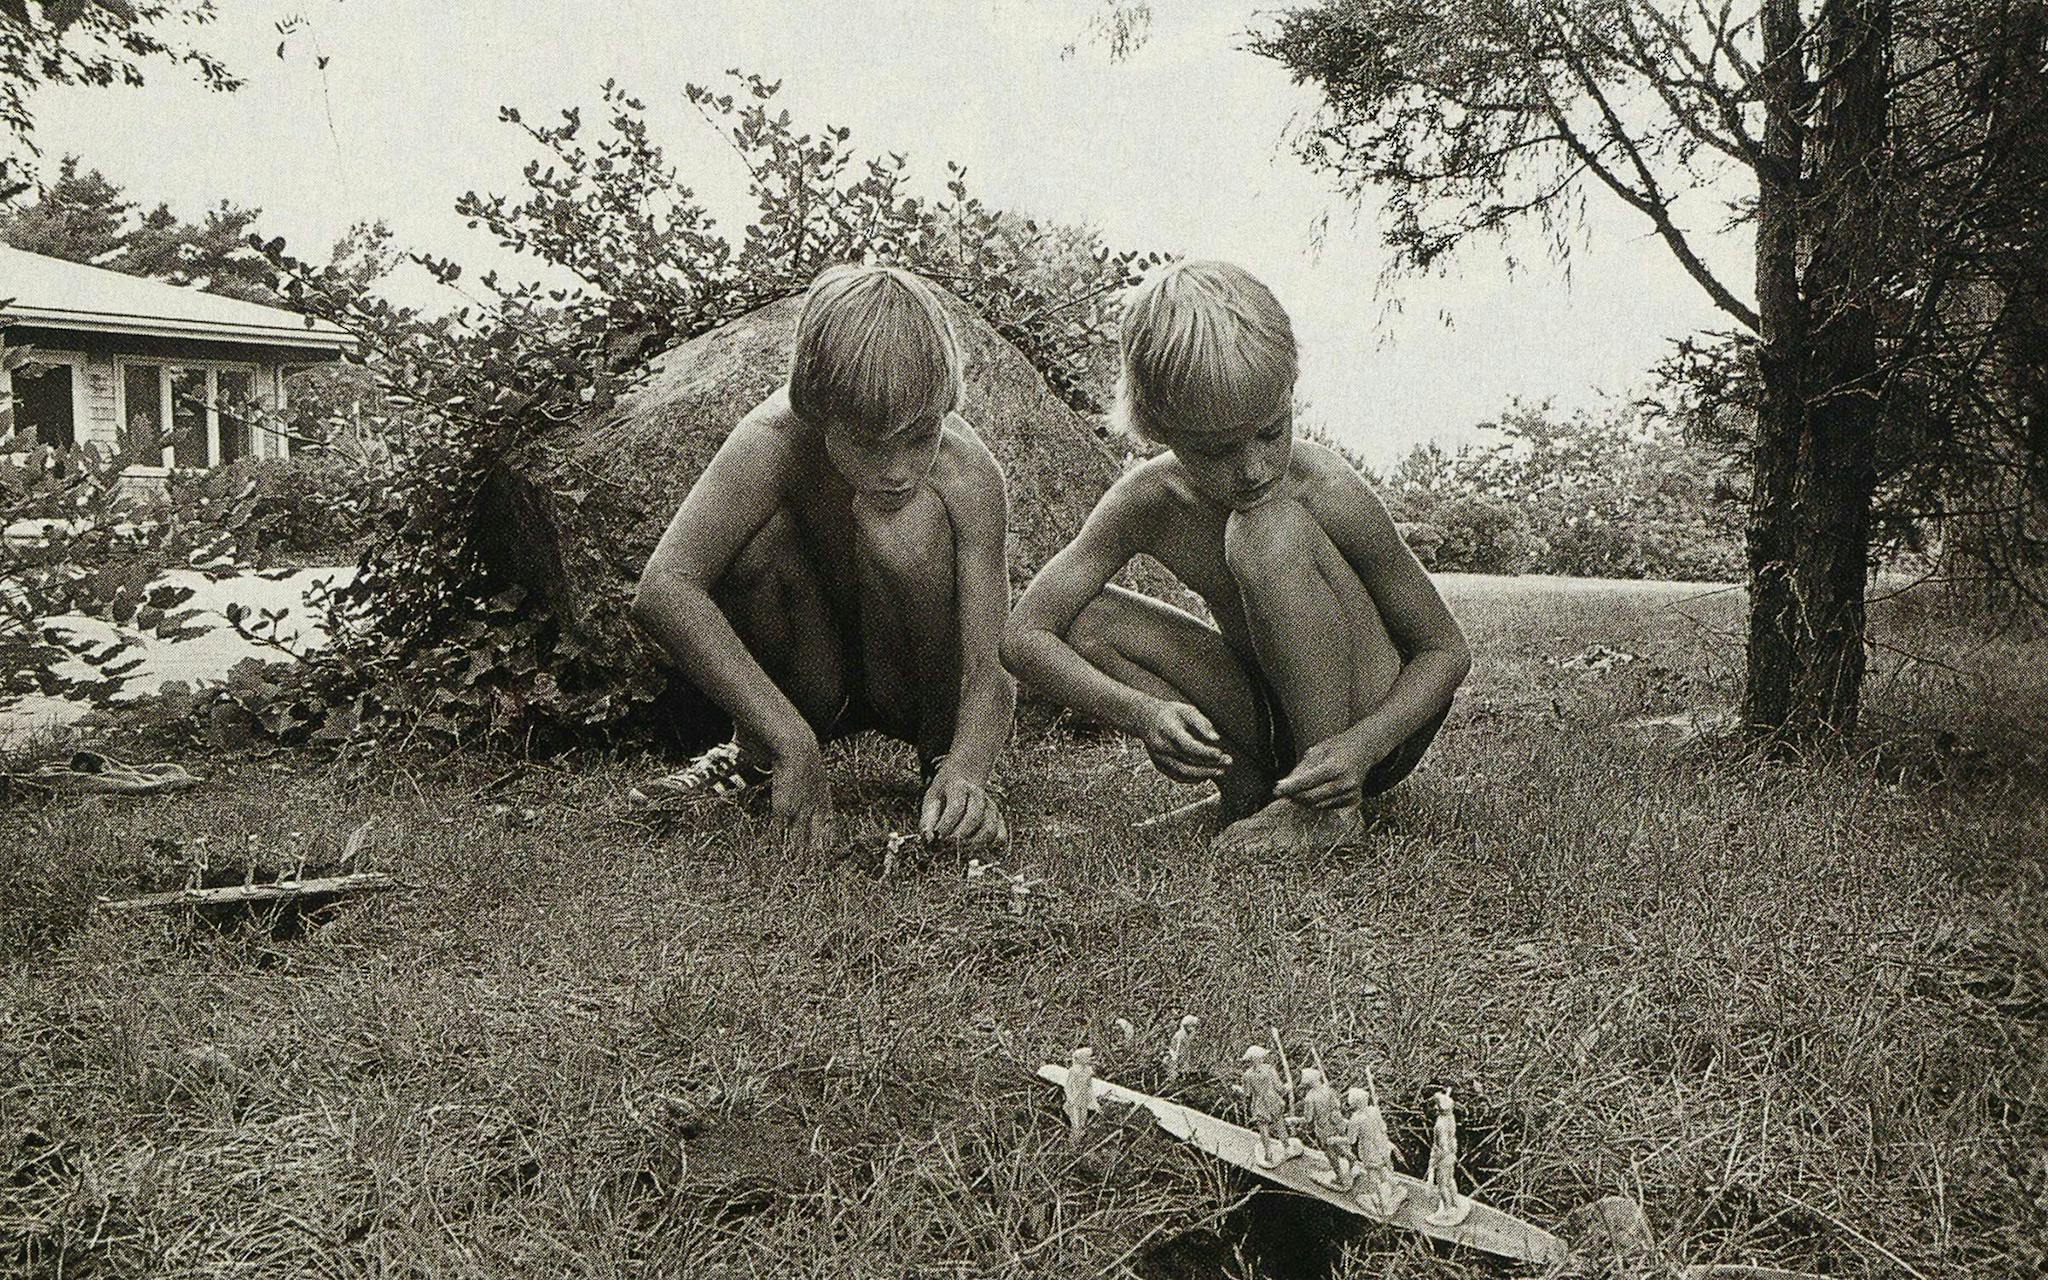 Young Andrew and Owen Wilson squatting over their game of toy soldiers.